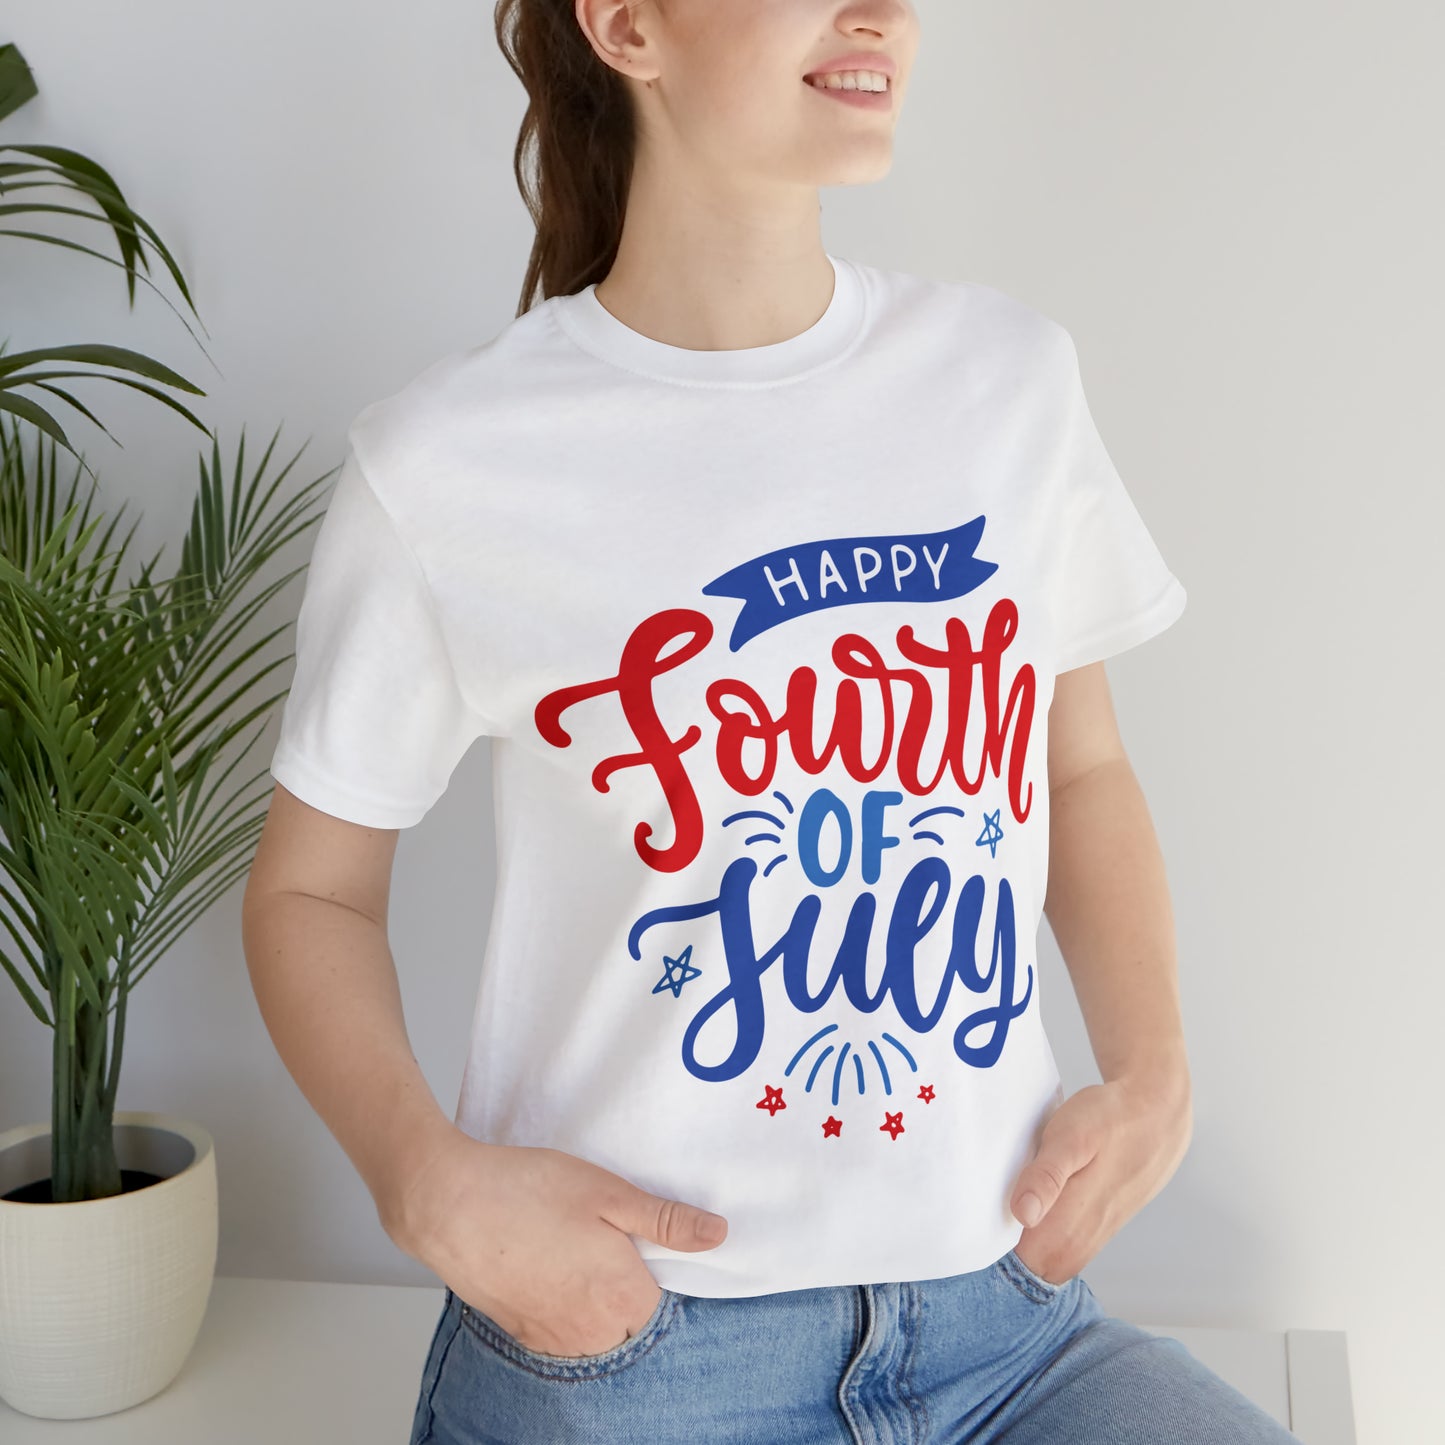 White T-Shirt Tshirt Design Gift for Friend and Family Short Sleeved Shirt July 4th Independence Day Petrova Designs